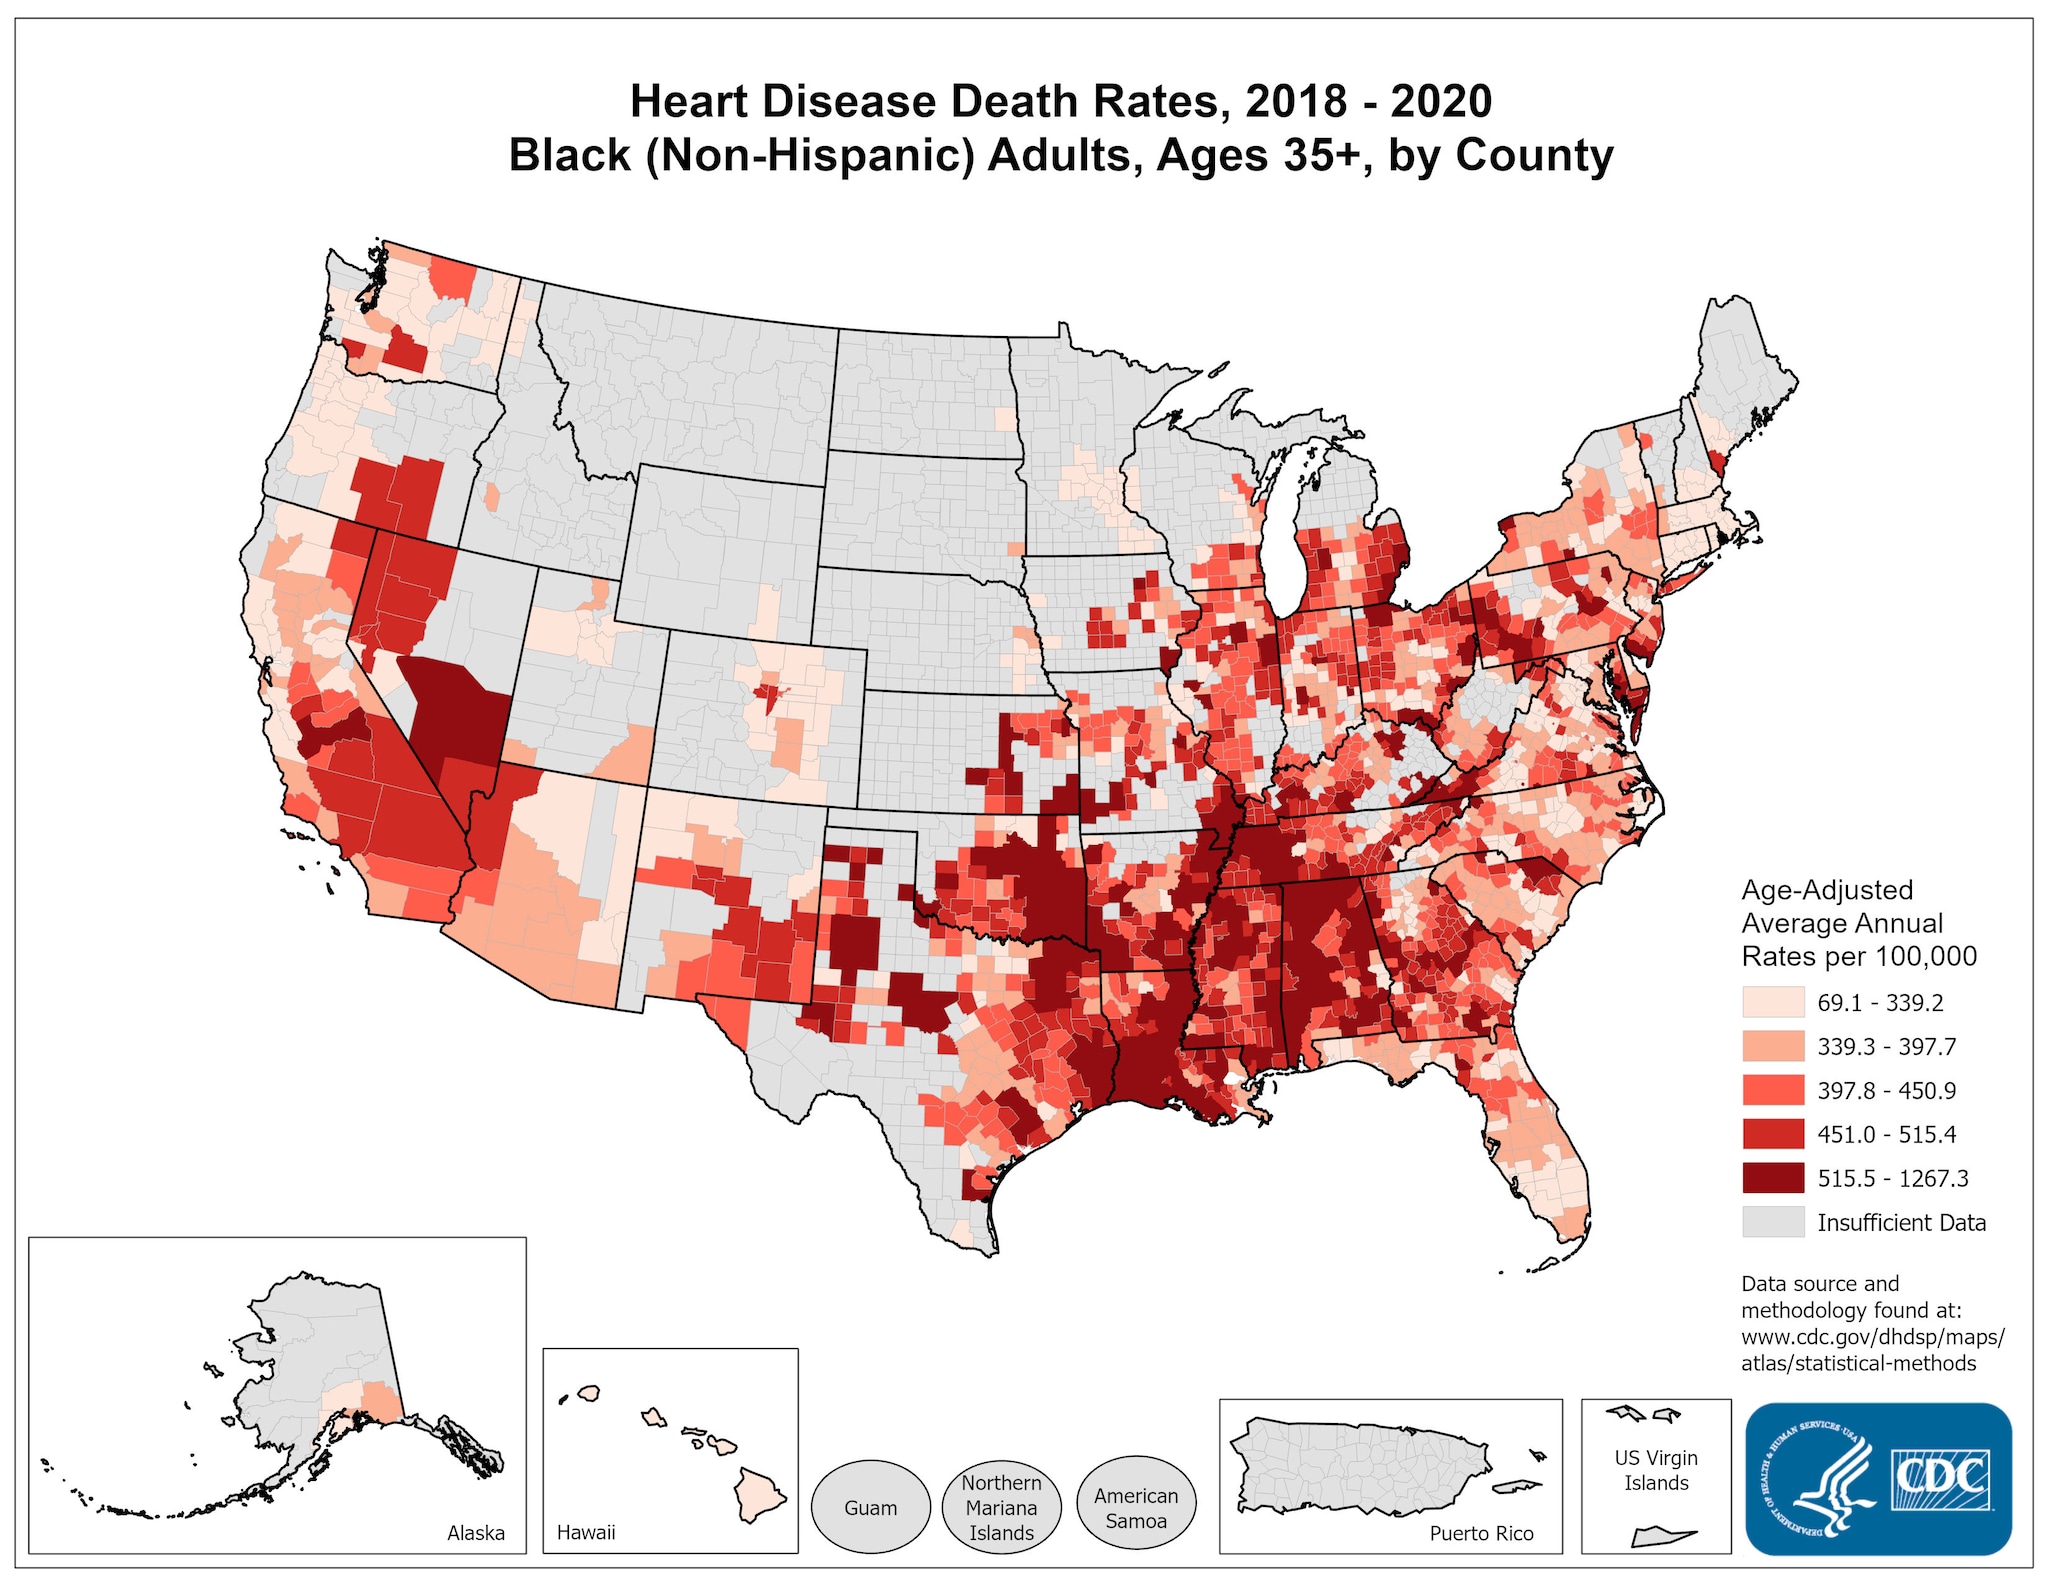 Heart Disease Death Rates for 2018 through 2020 for Blacks Aged 35 Years and Older by County